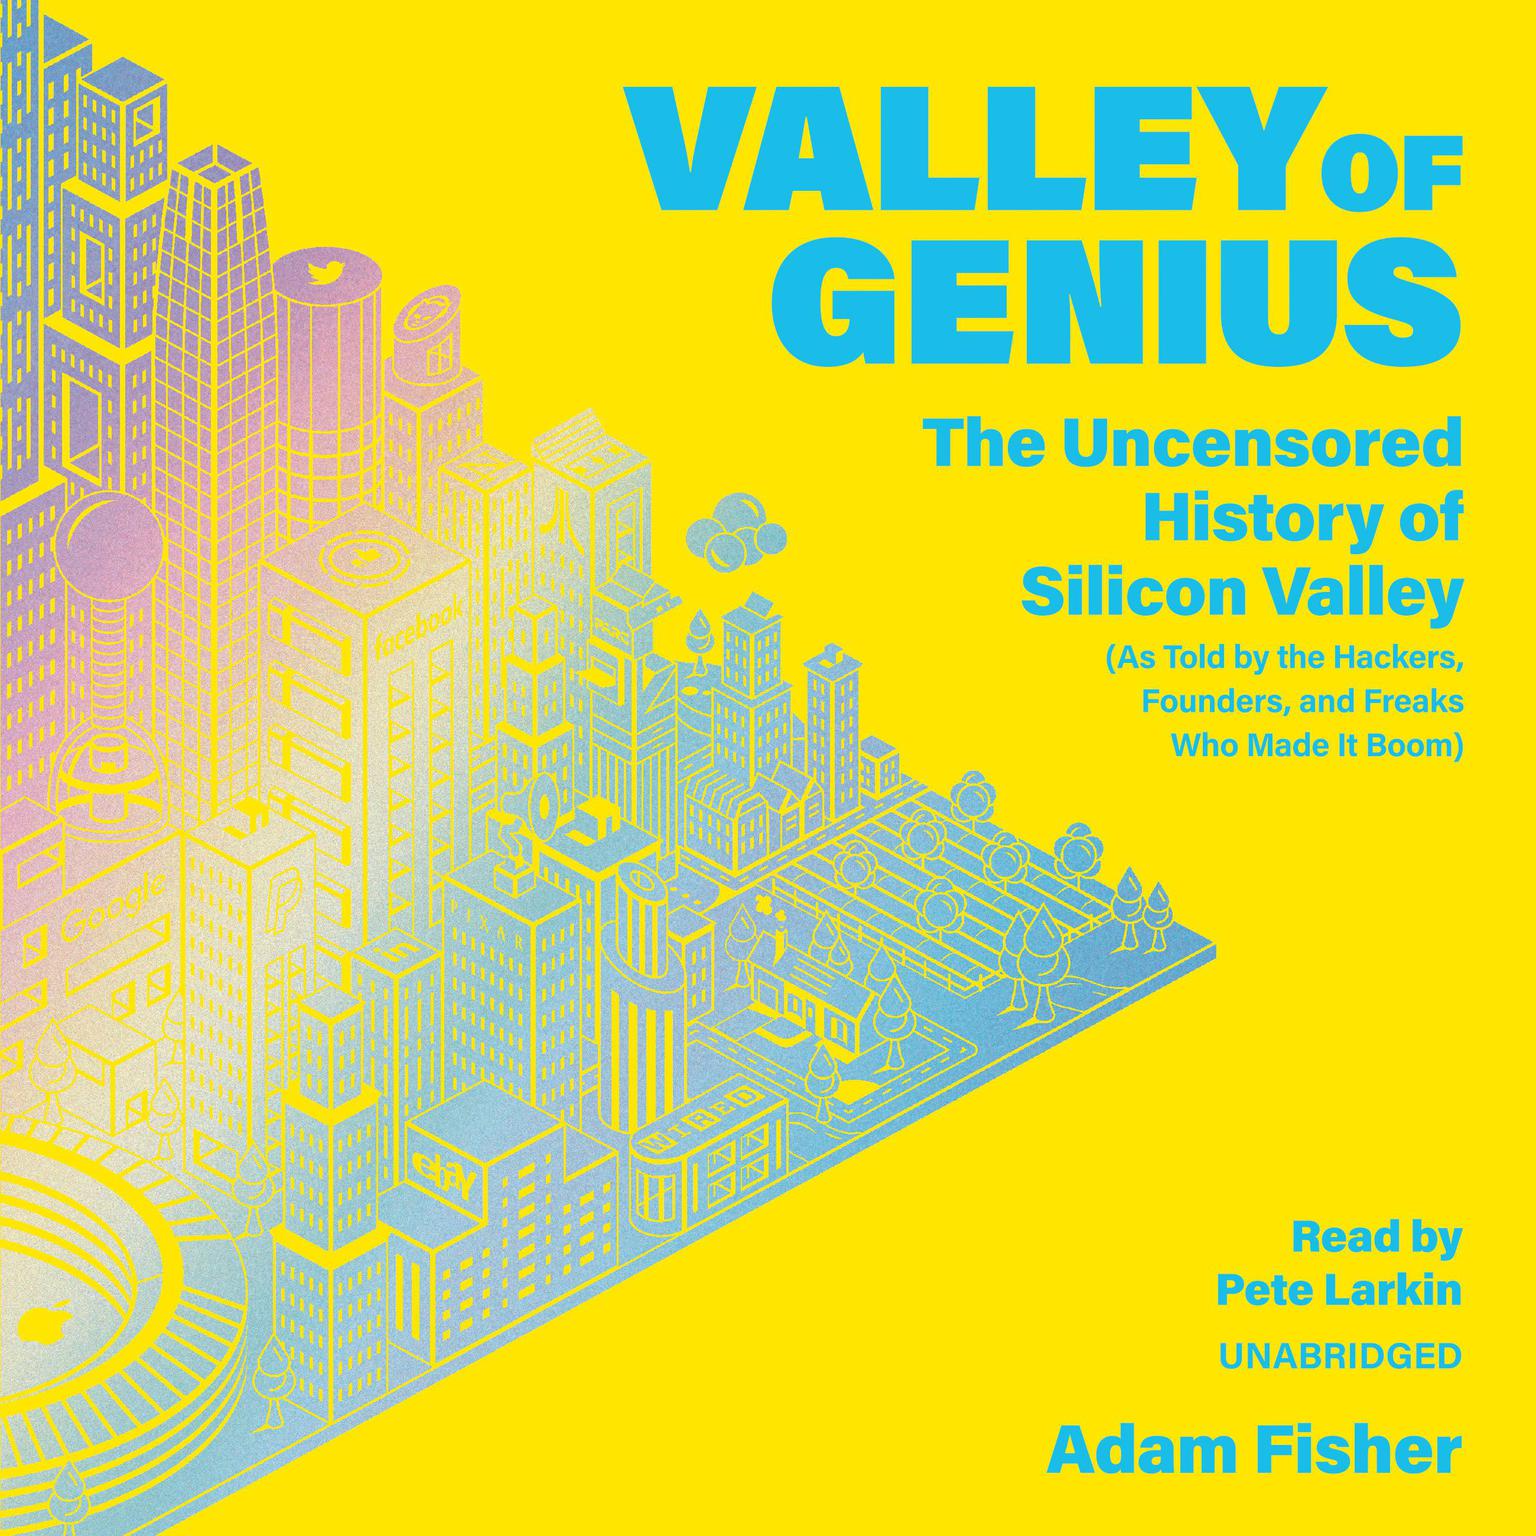 Valley of Genius: The Uncensored History of Silicon Valley (As Told by the Hackers, Founders, and Freaks Who Made It Boom) Audiobook, by Adam Fisher